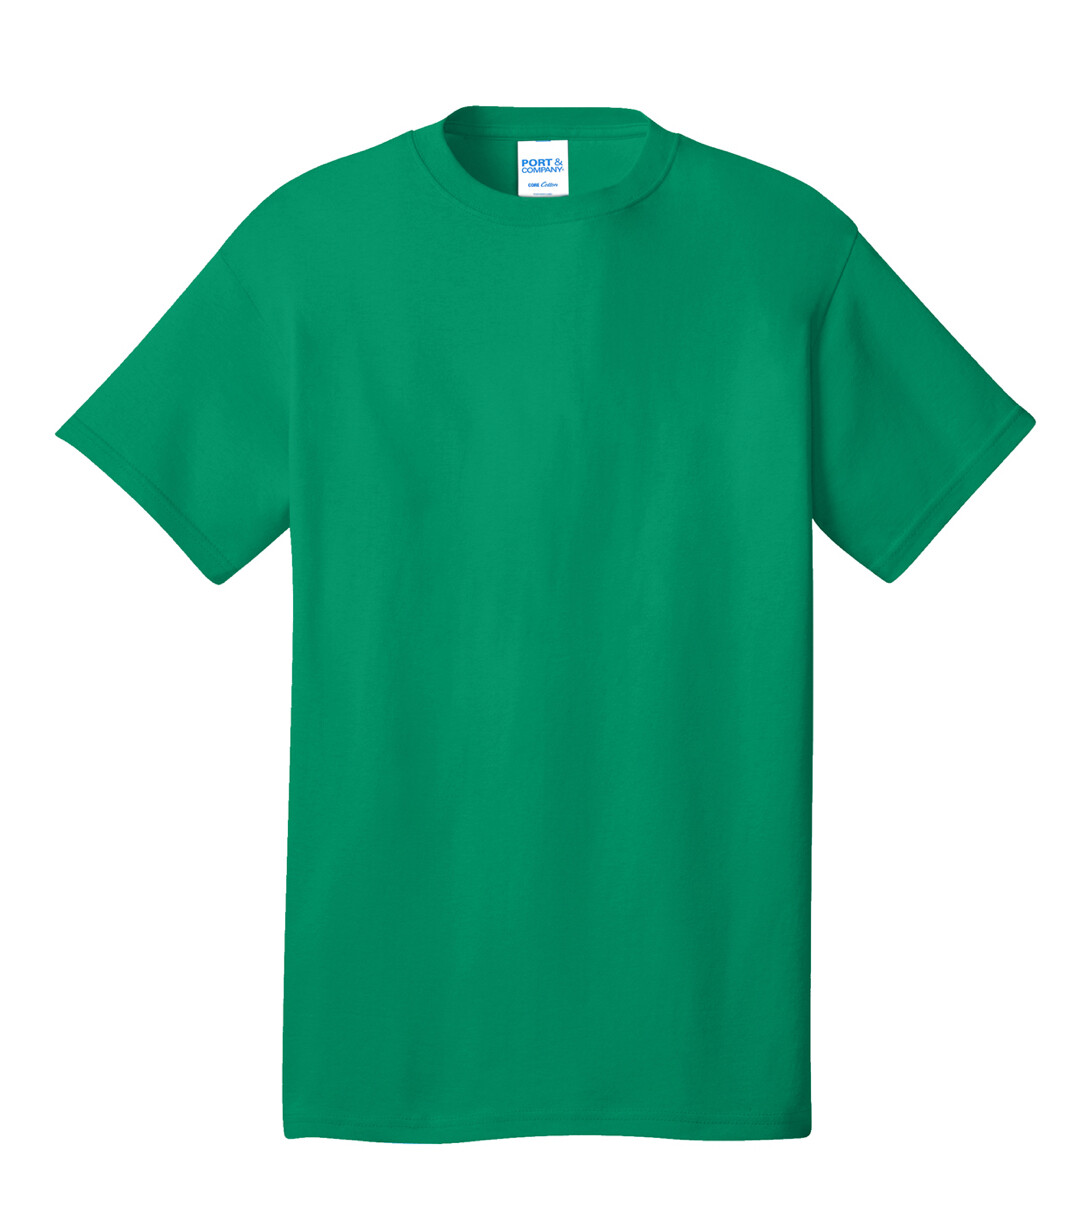 Ski & Snowboard Club Cotton Short Sleeve T-shirt - Adult and Youth Sizes